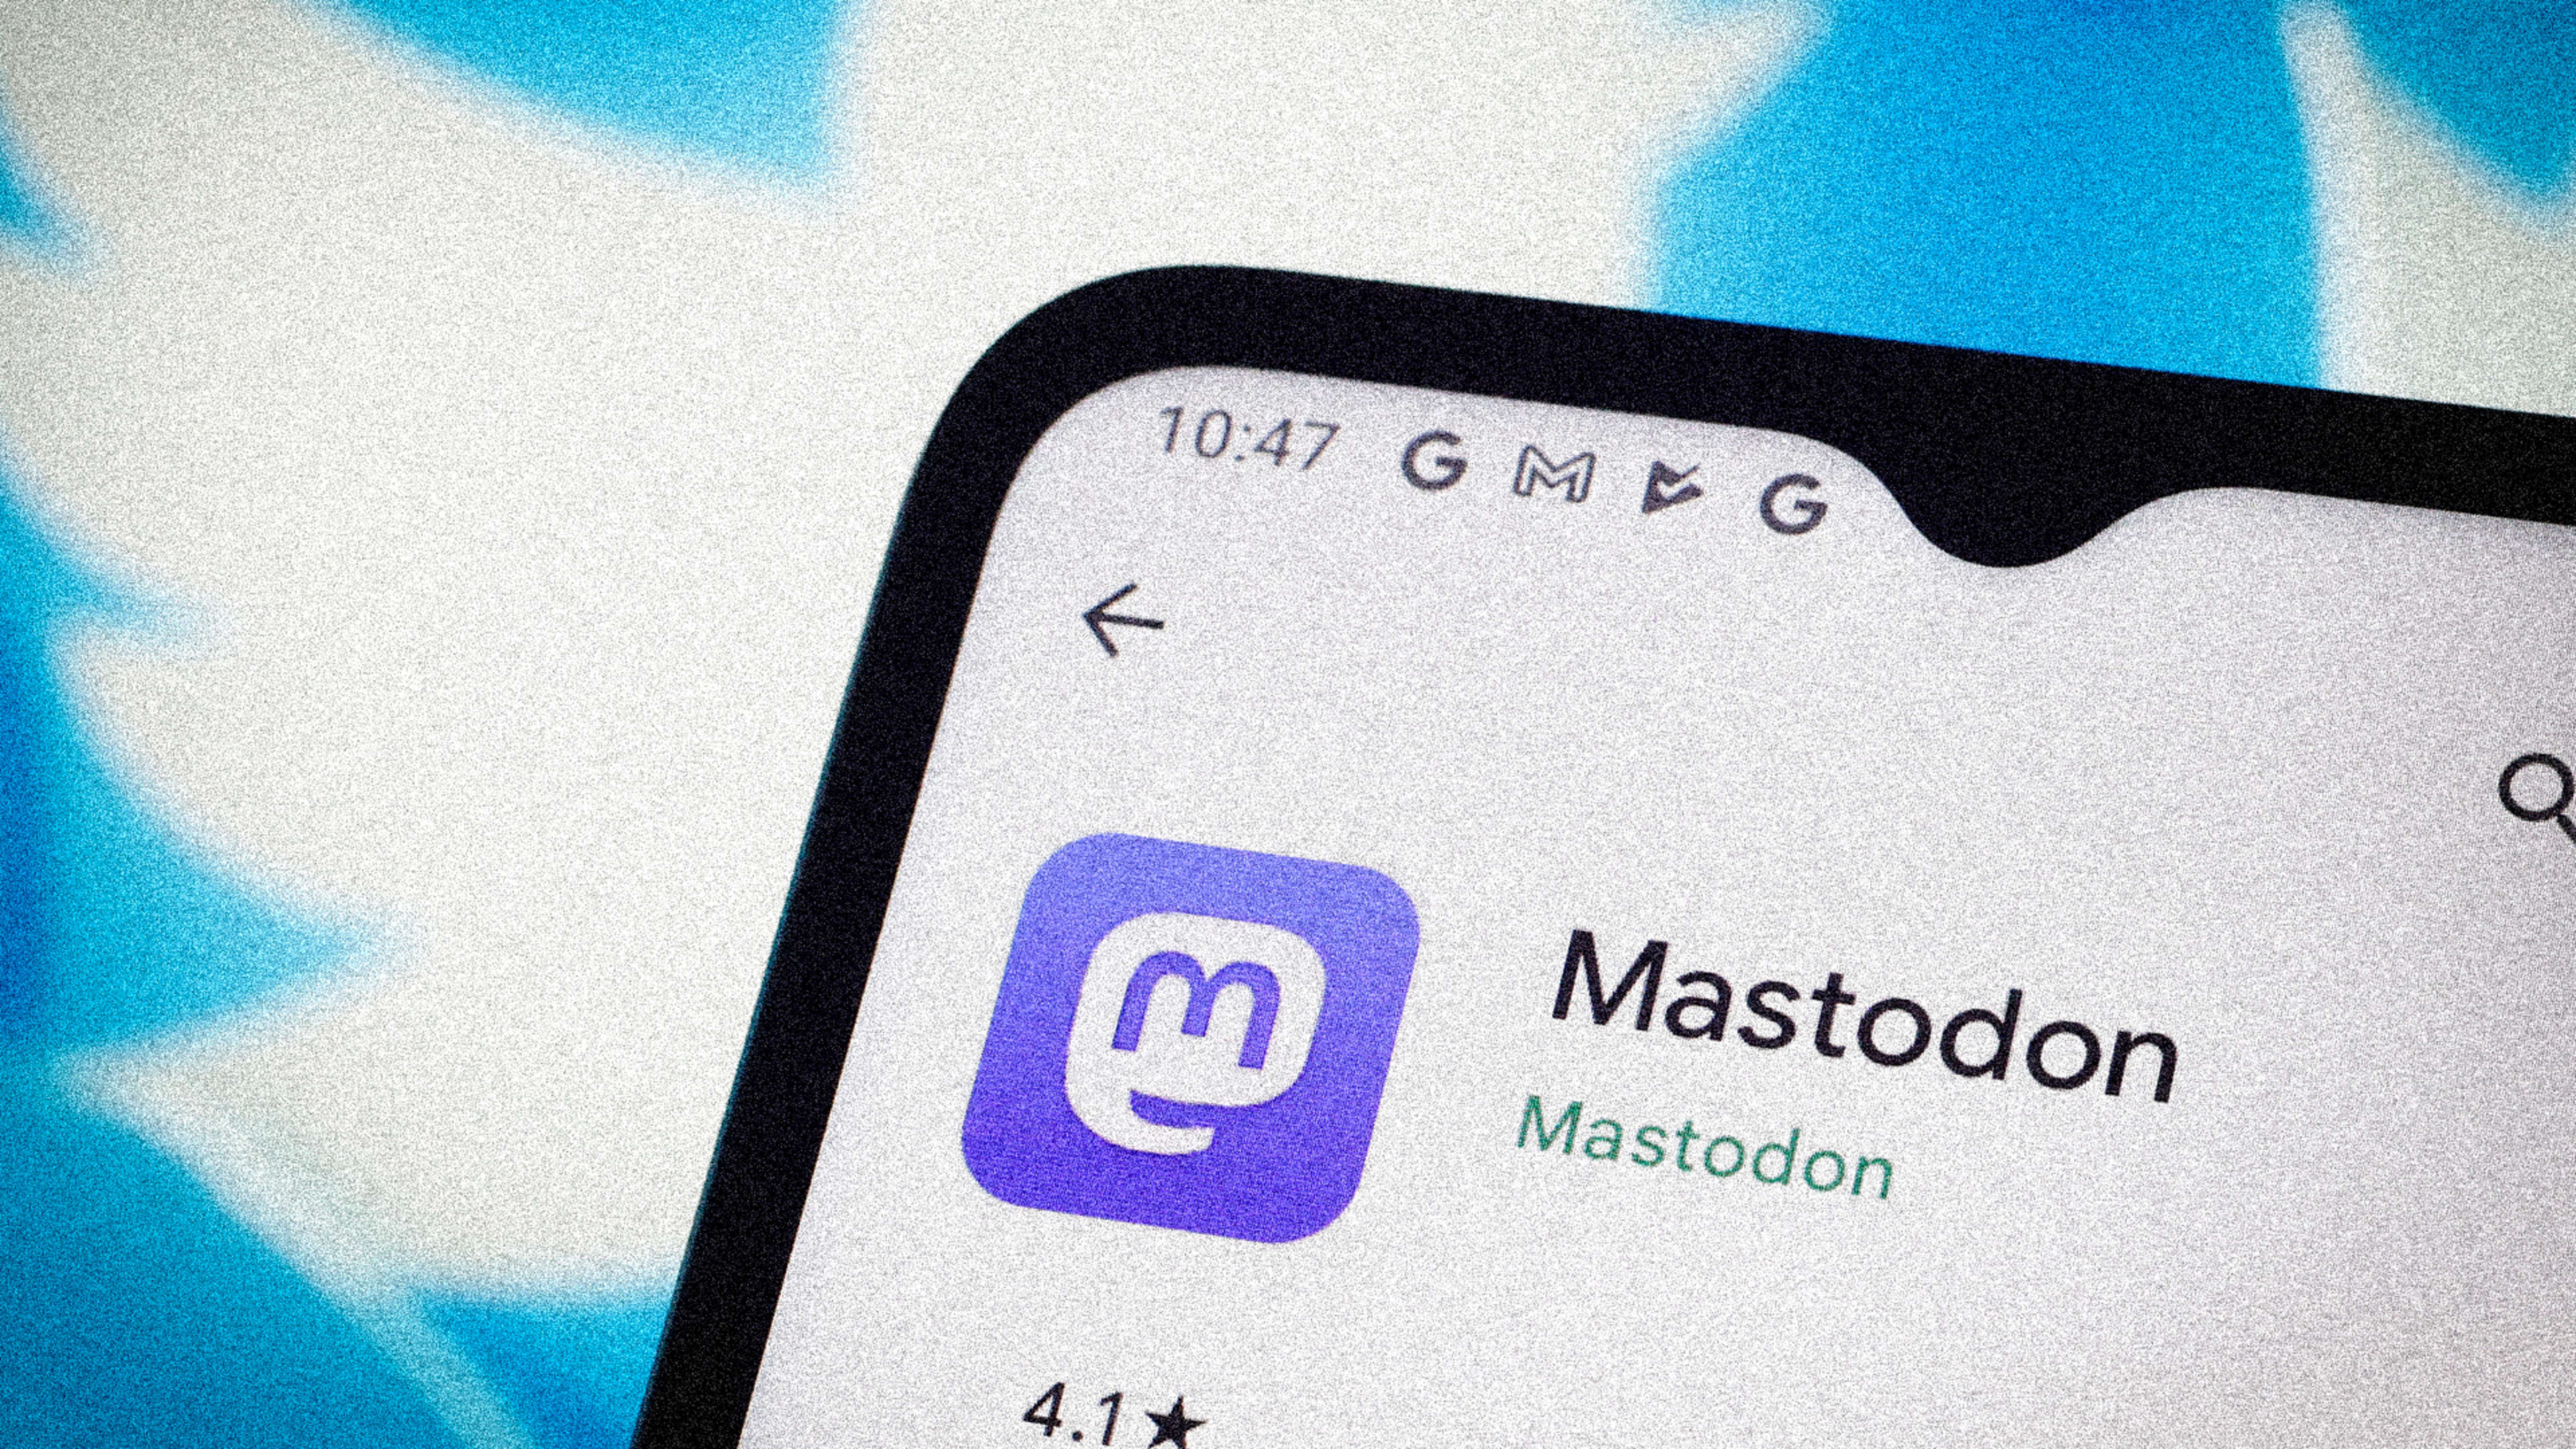 Can Mastodon’s culture adapt to welcome the Twitter masses?